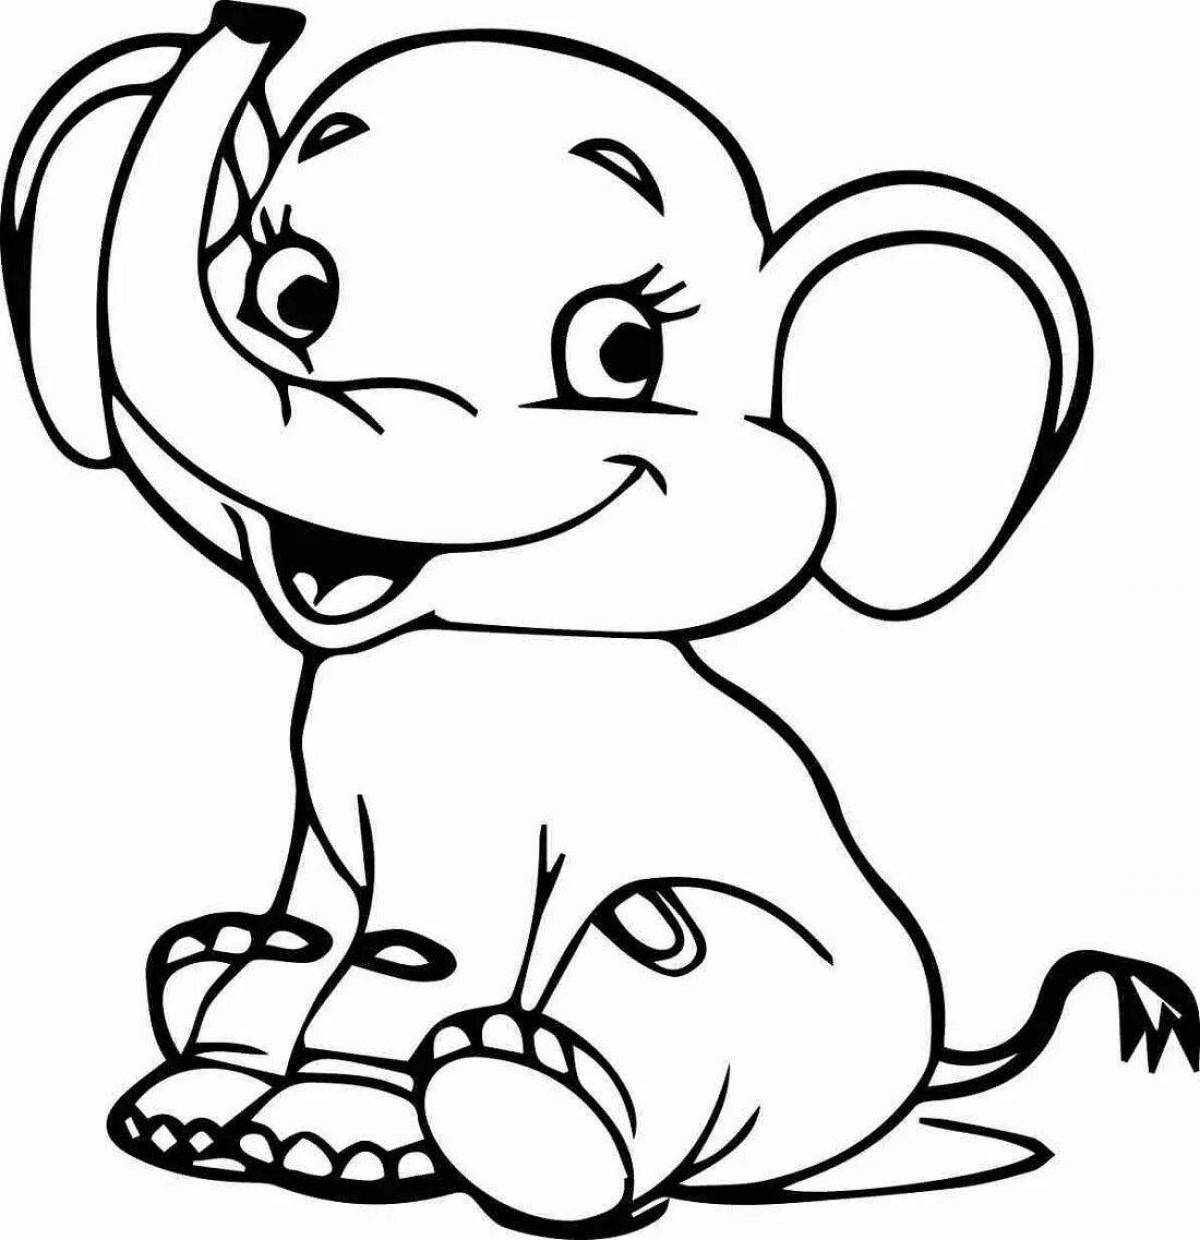 Cheerful elephant coloring for children